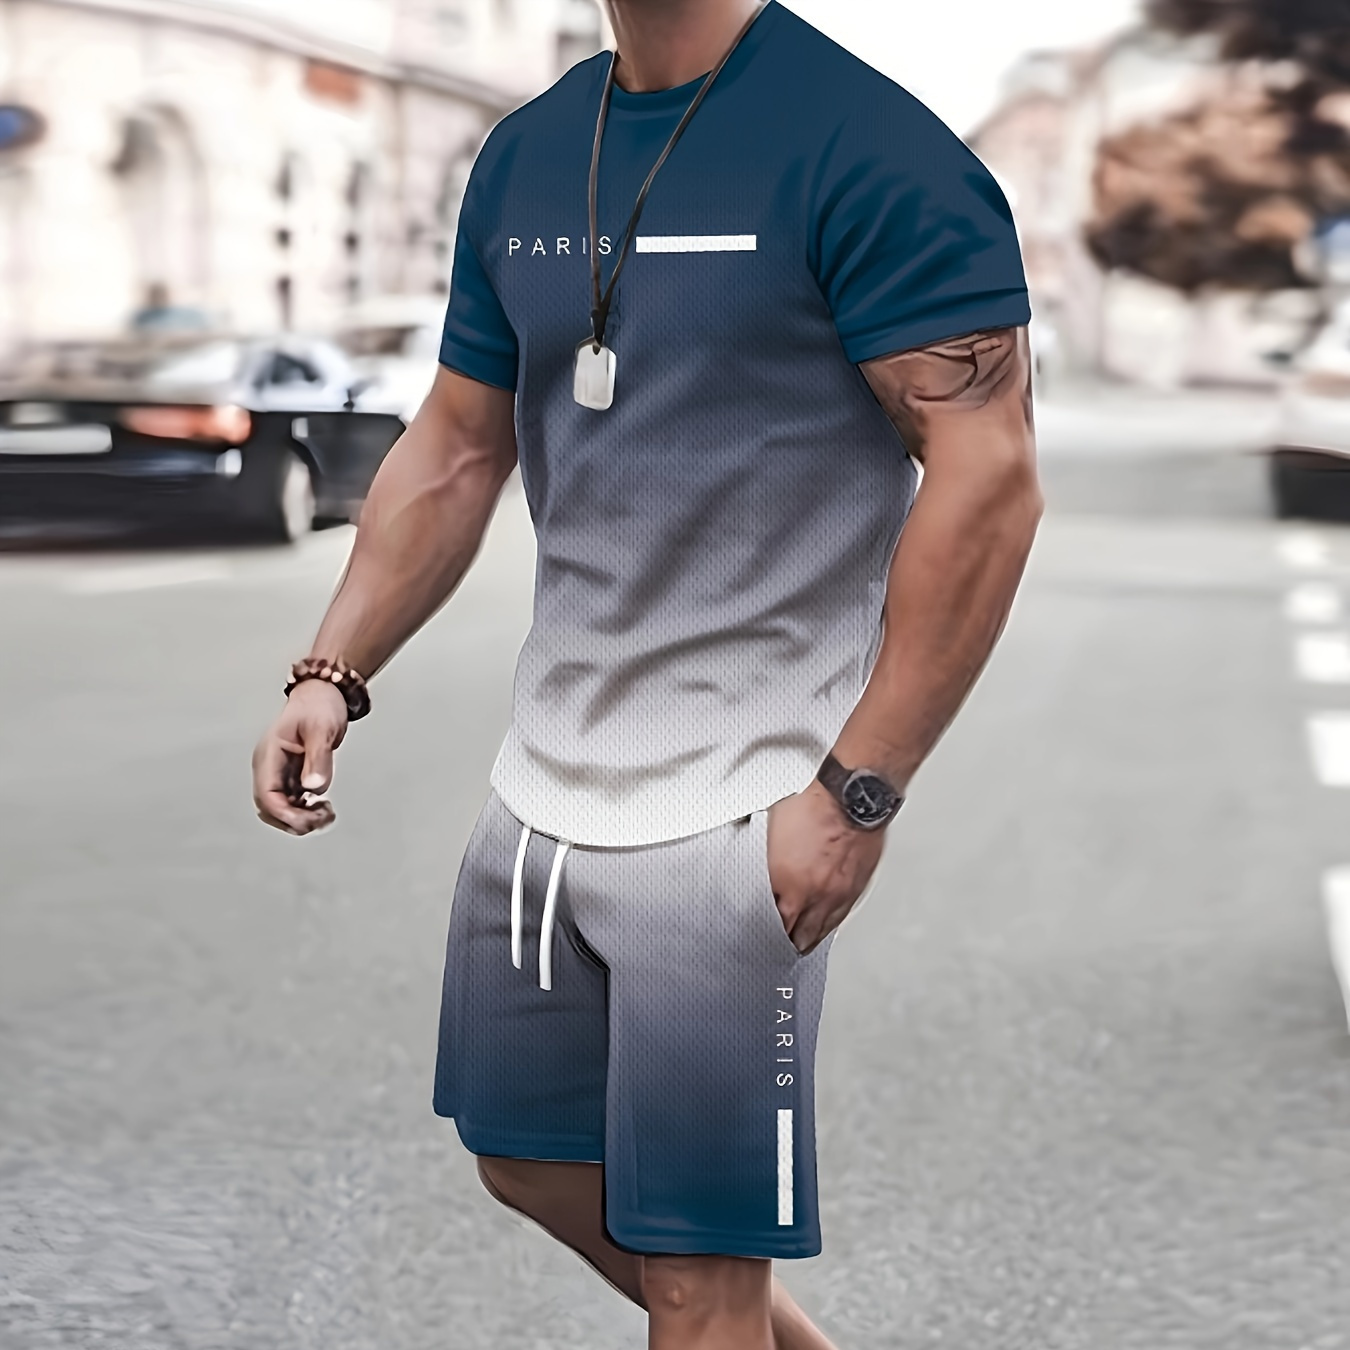 

Men's Casual Co Ord Set Of Gradient Color And "paris" Print Outfits, Crew Neck And Short Sleeve T-shirt And Shorts, Casual And Comfy Set For Summer Daily Outerwear